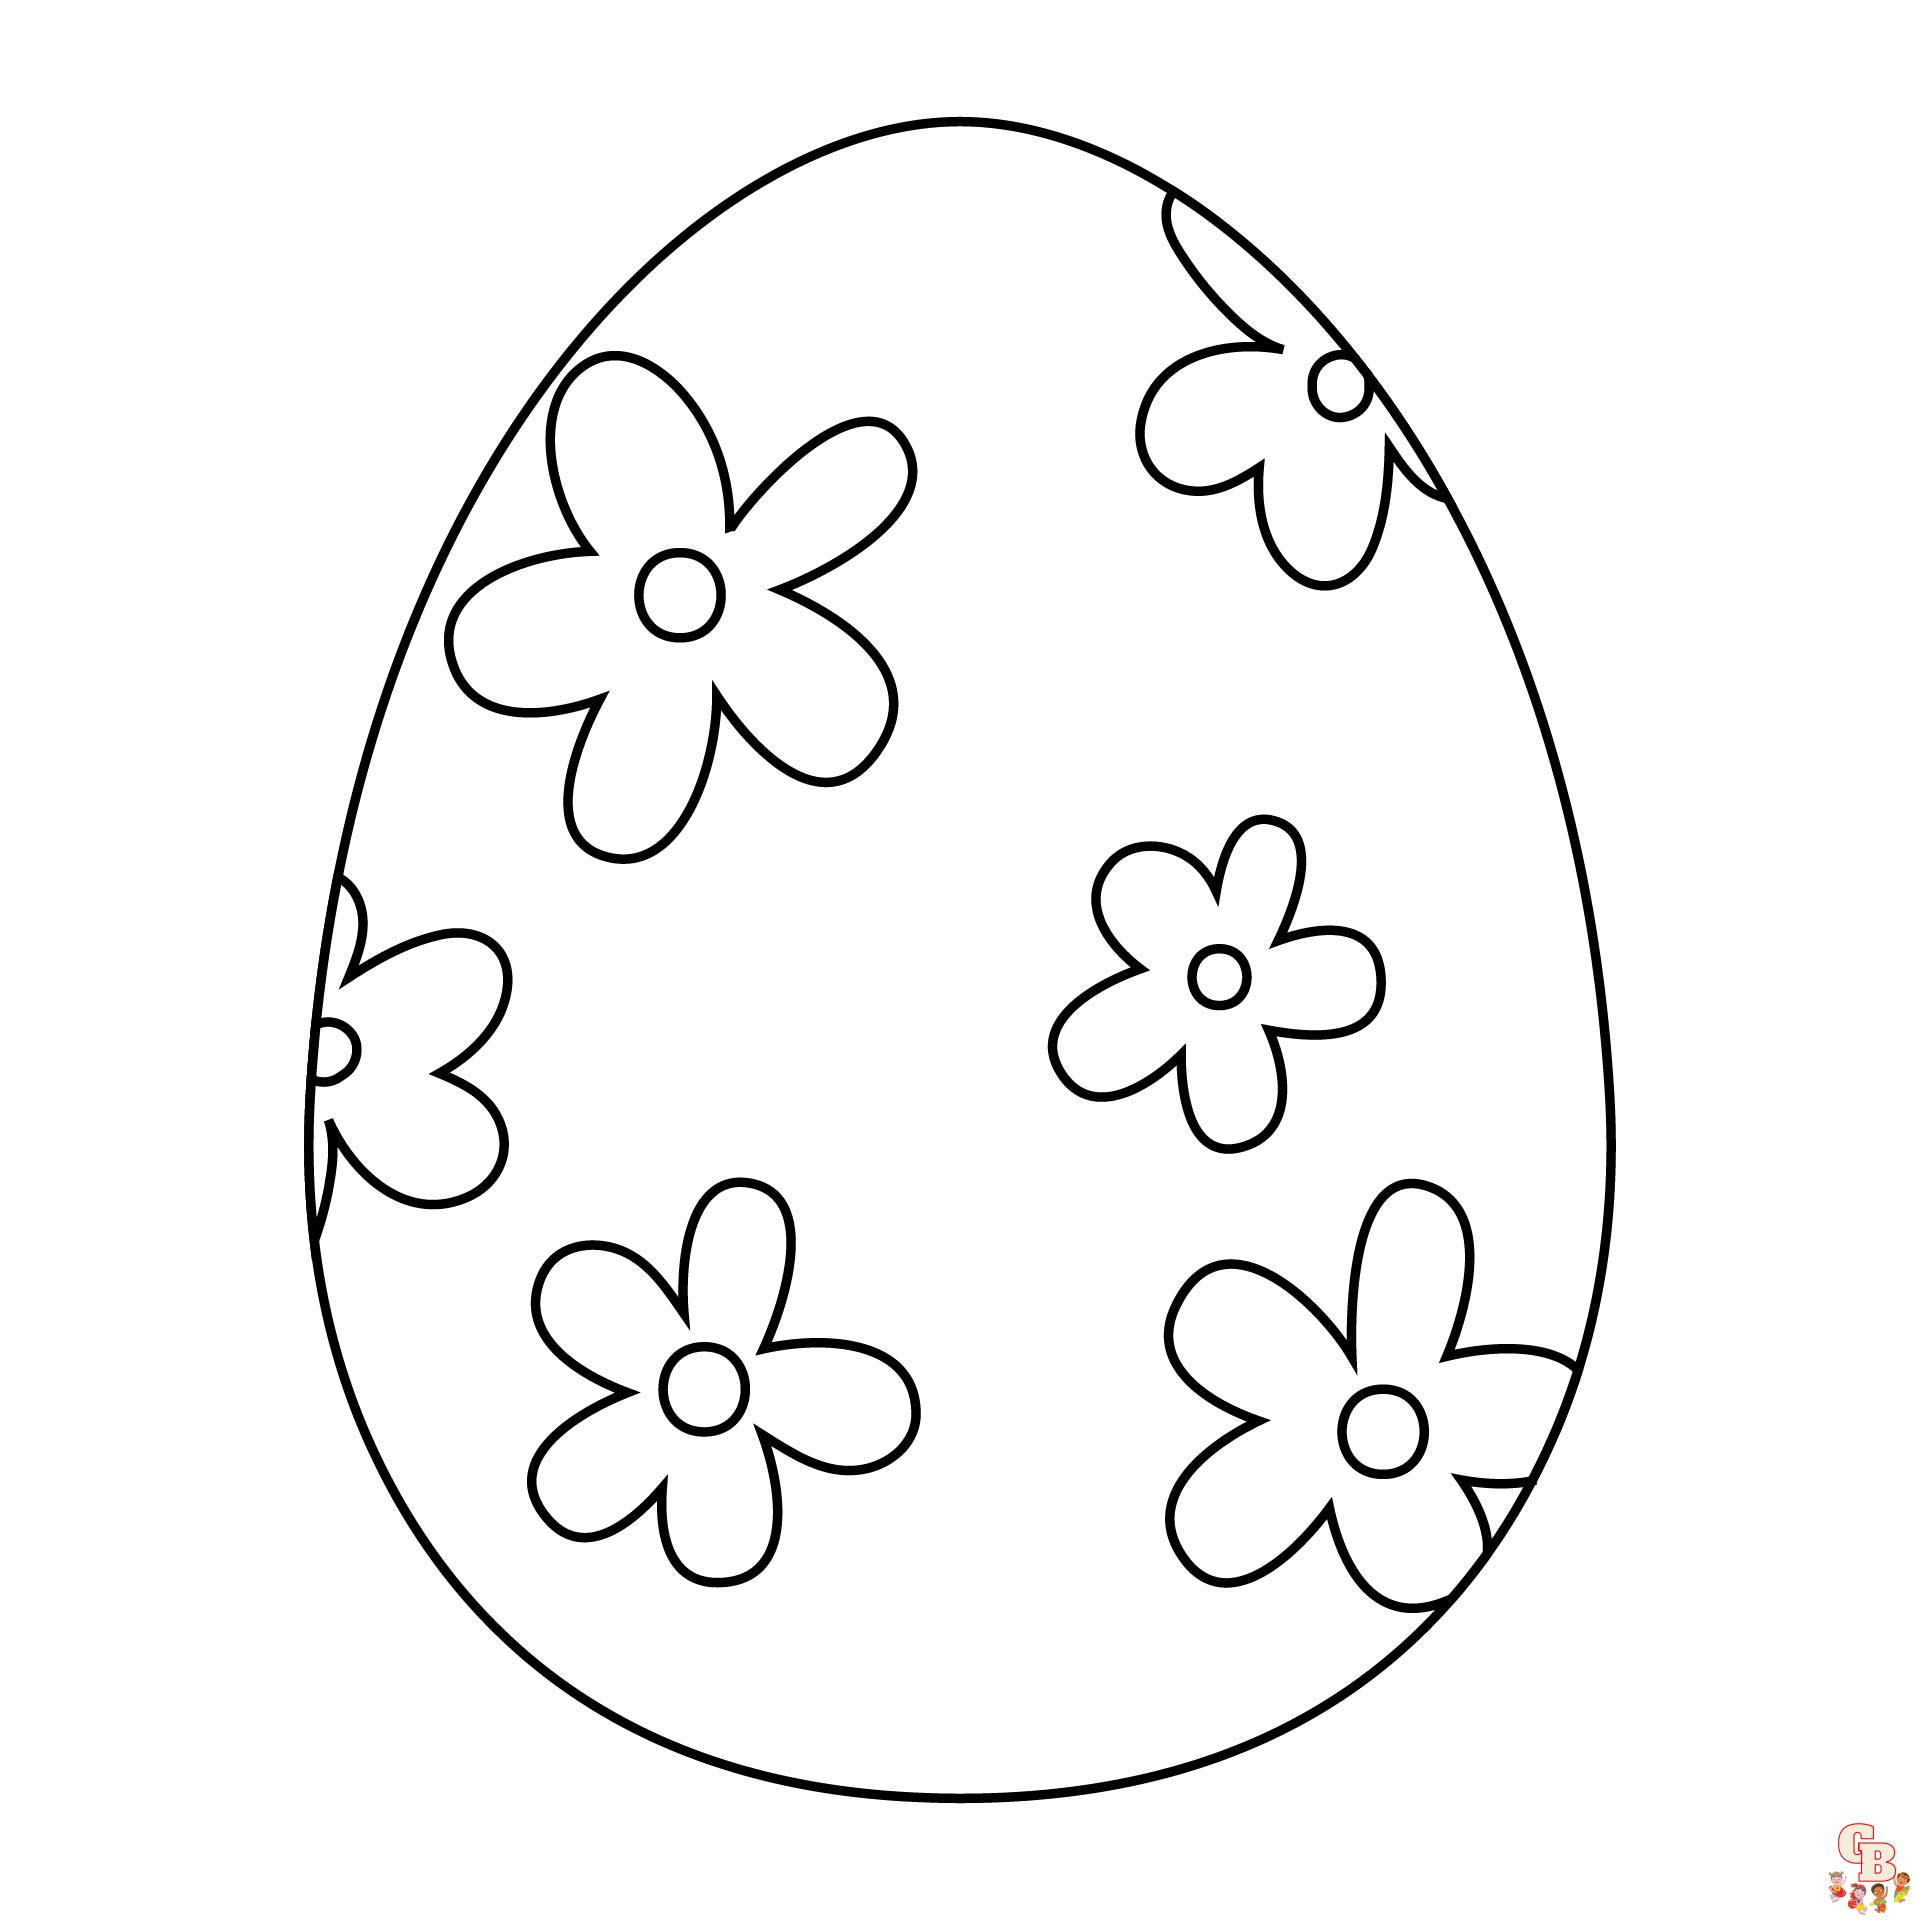 Circle Coloring Pages 2